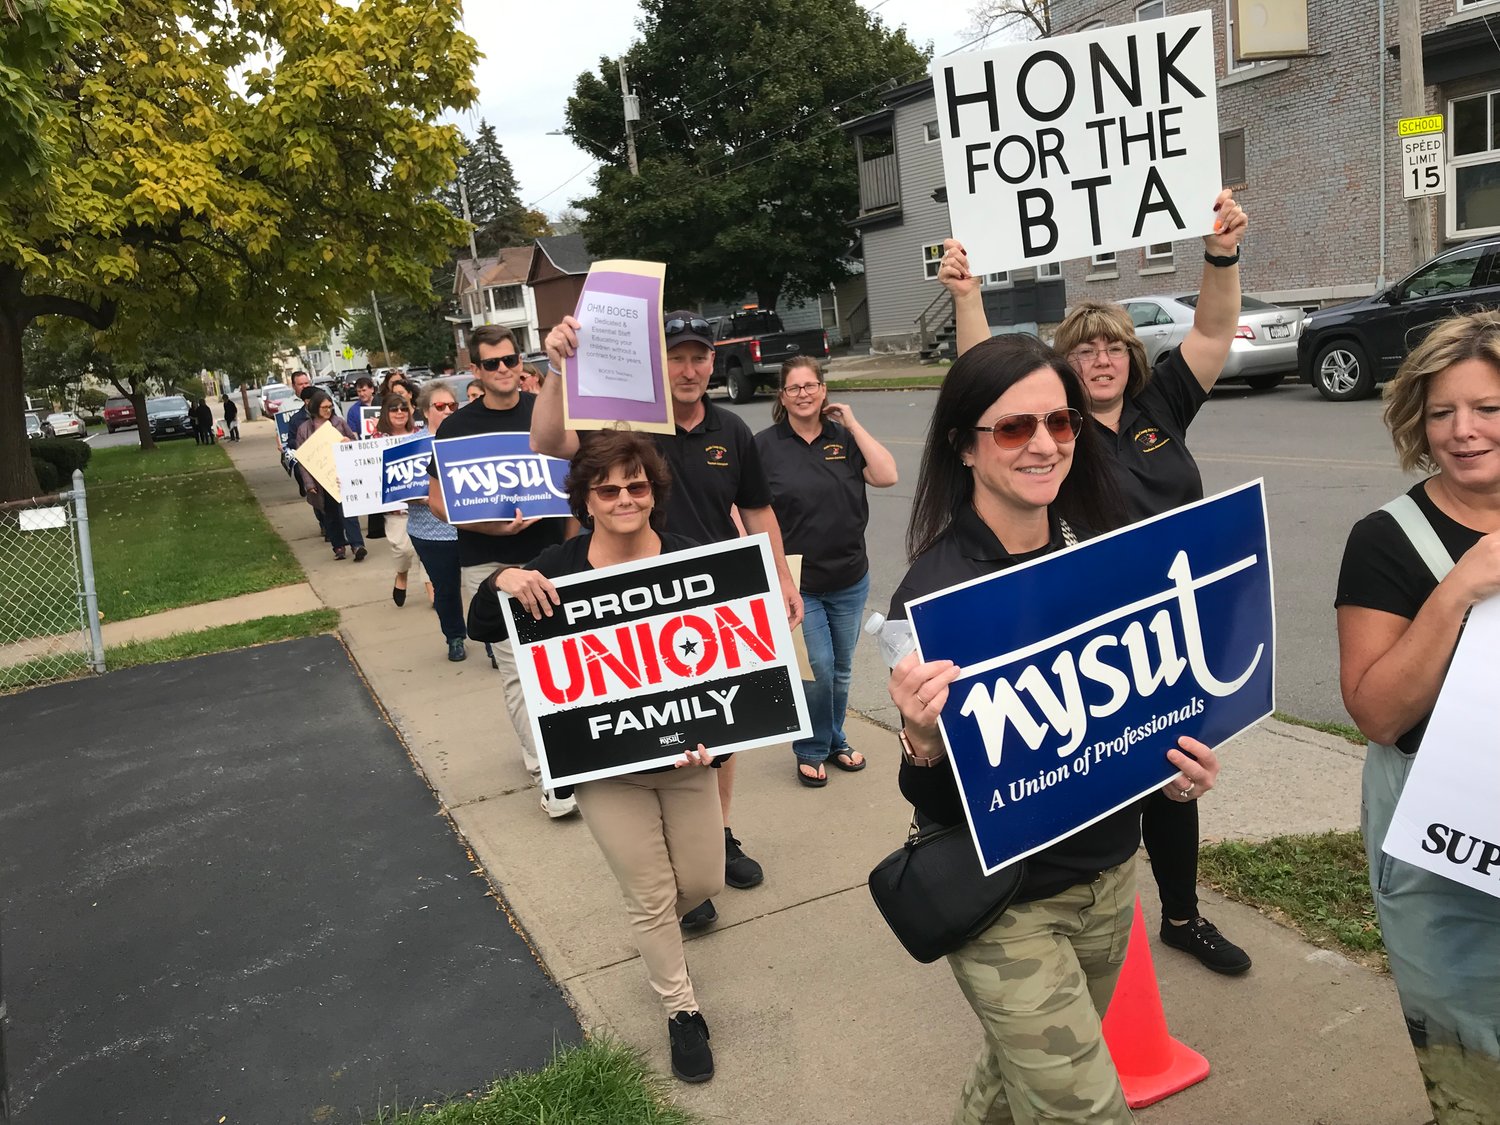 Oneida County BOCES Teachers Association members and supporters picketed Wednesday outside the meeting place of the BOCES Cooperative Board at Middle Settlement Academy on Lincoln Avenue in Utica.